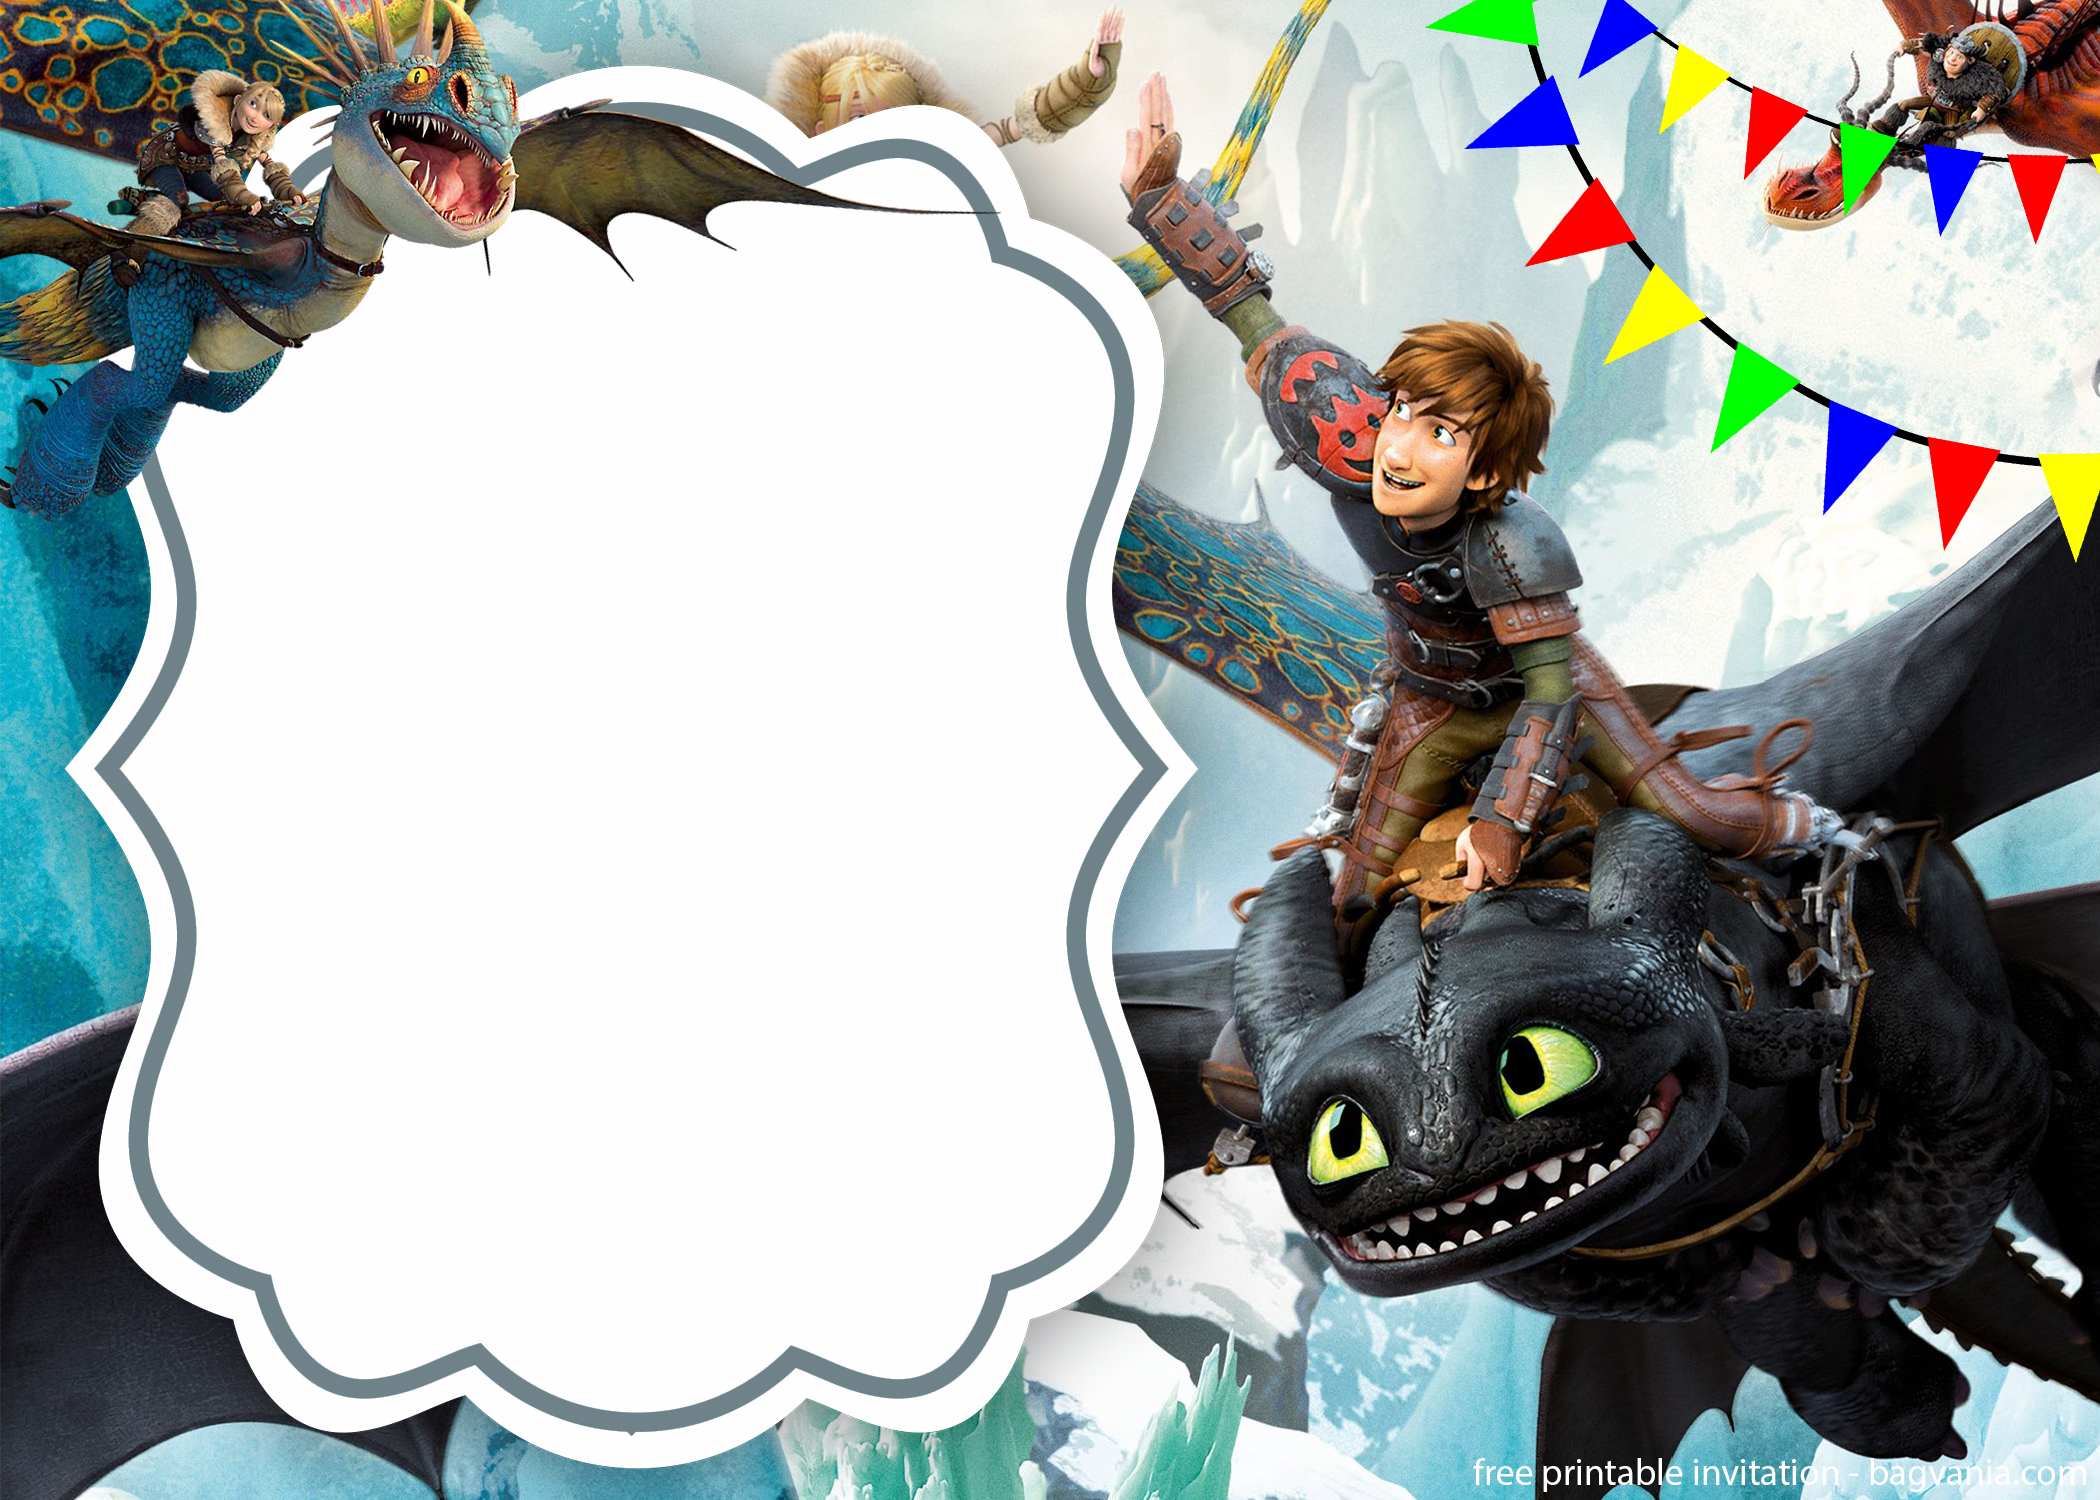 Free Download How To Train Your Dragon Invitation FREE Printable 